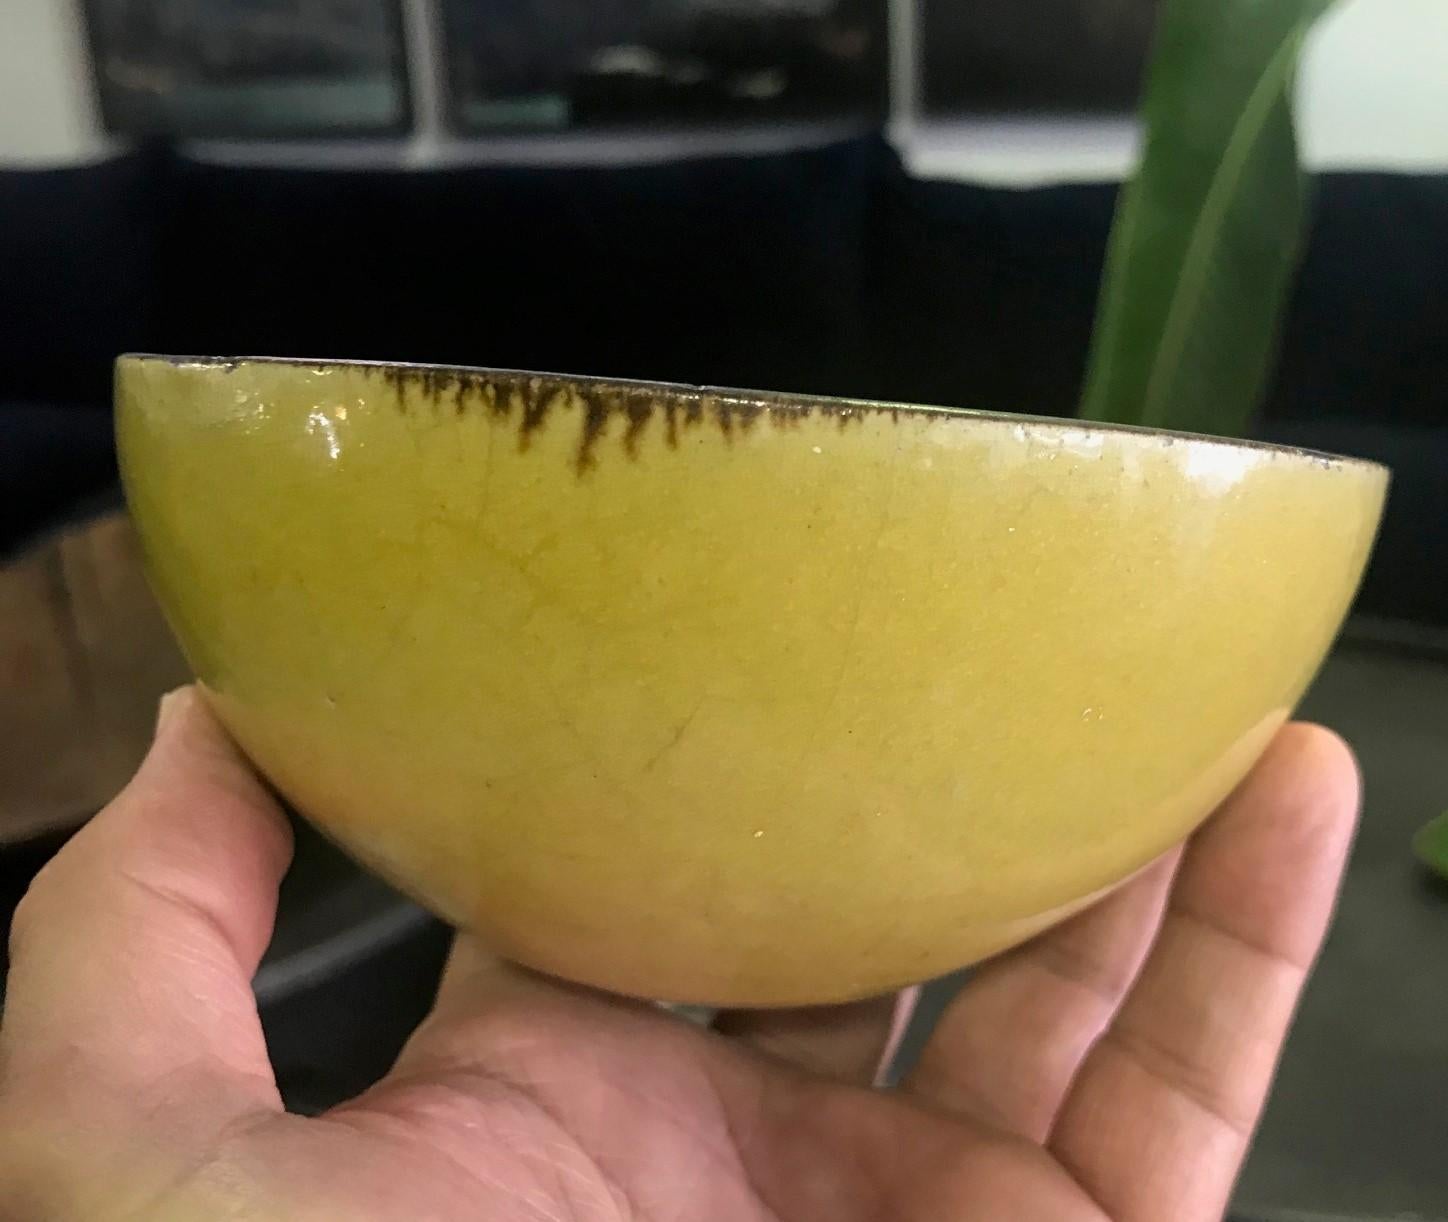 Lucie Rie & Hans Coper Signed Stamped Yellow Glazed Stoneware Bowl, circa 1950 For Sale 5